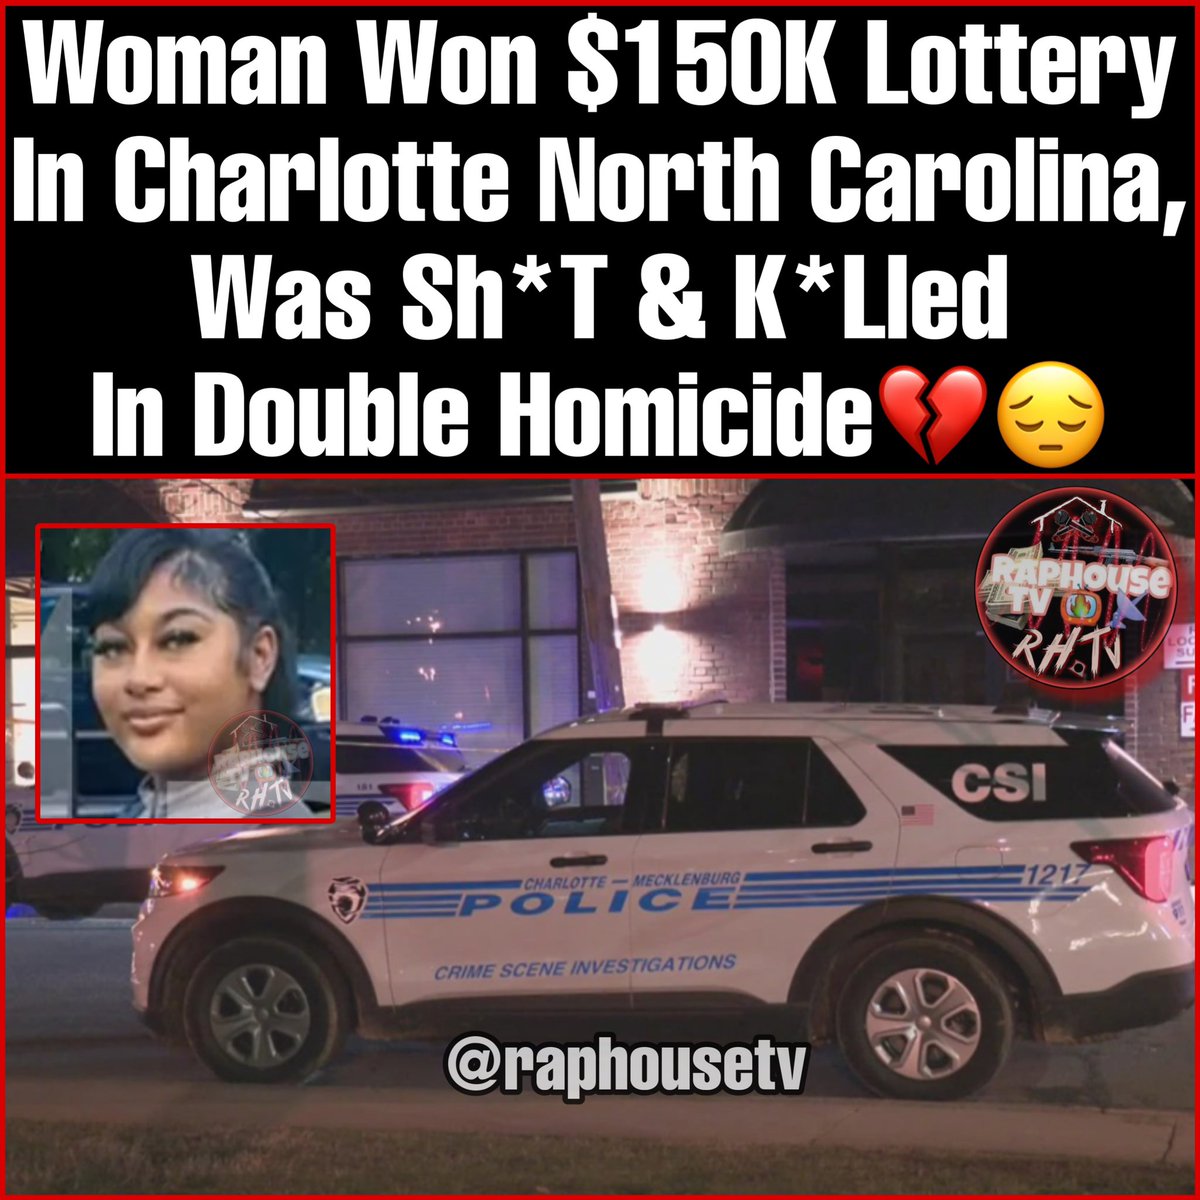 Woman Won $150k Lottery In Charlotte North Carolina, Was Shot & Killed In Double Homicide💔😔